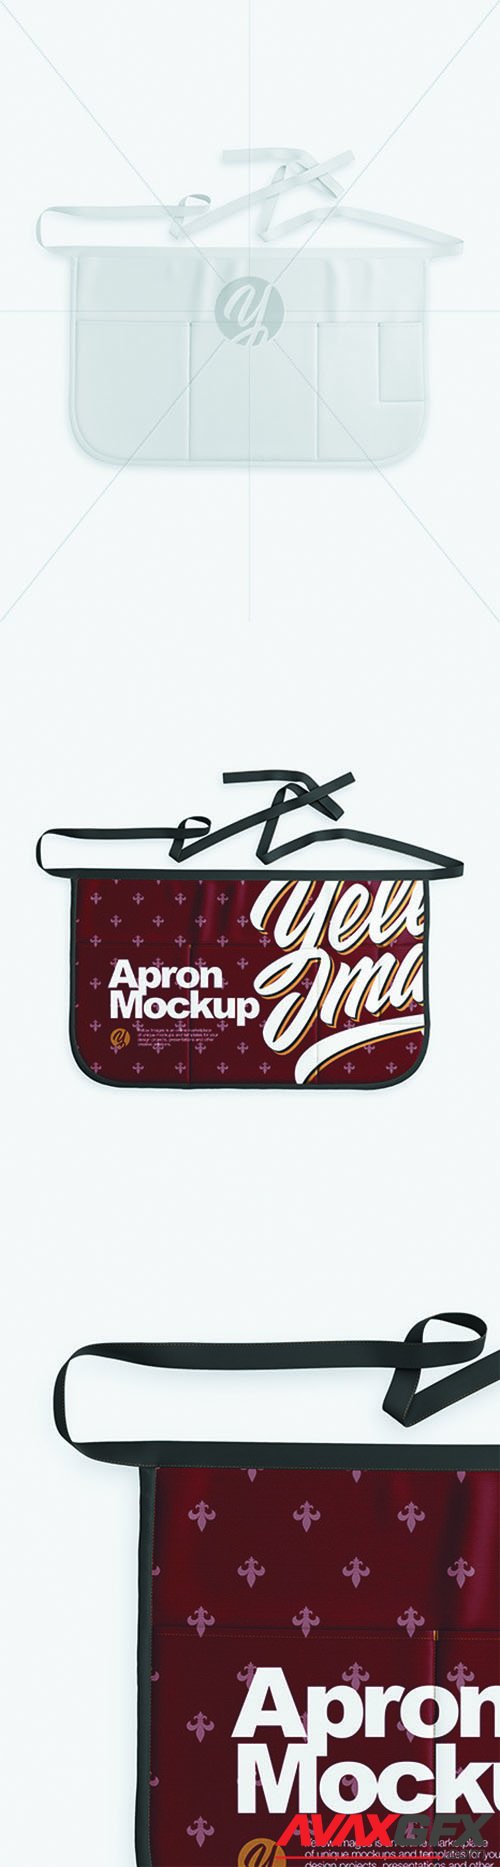 Download Apron Mockup 63831 » AVAXGFX - All Downloads that You Need in One Place! Graphic from Nitroflare ...